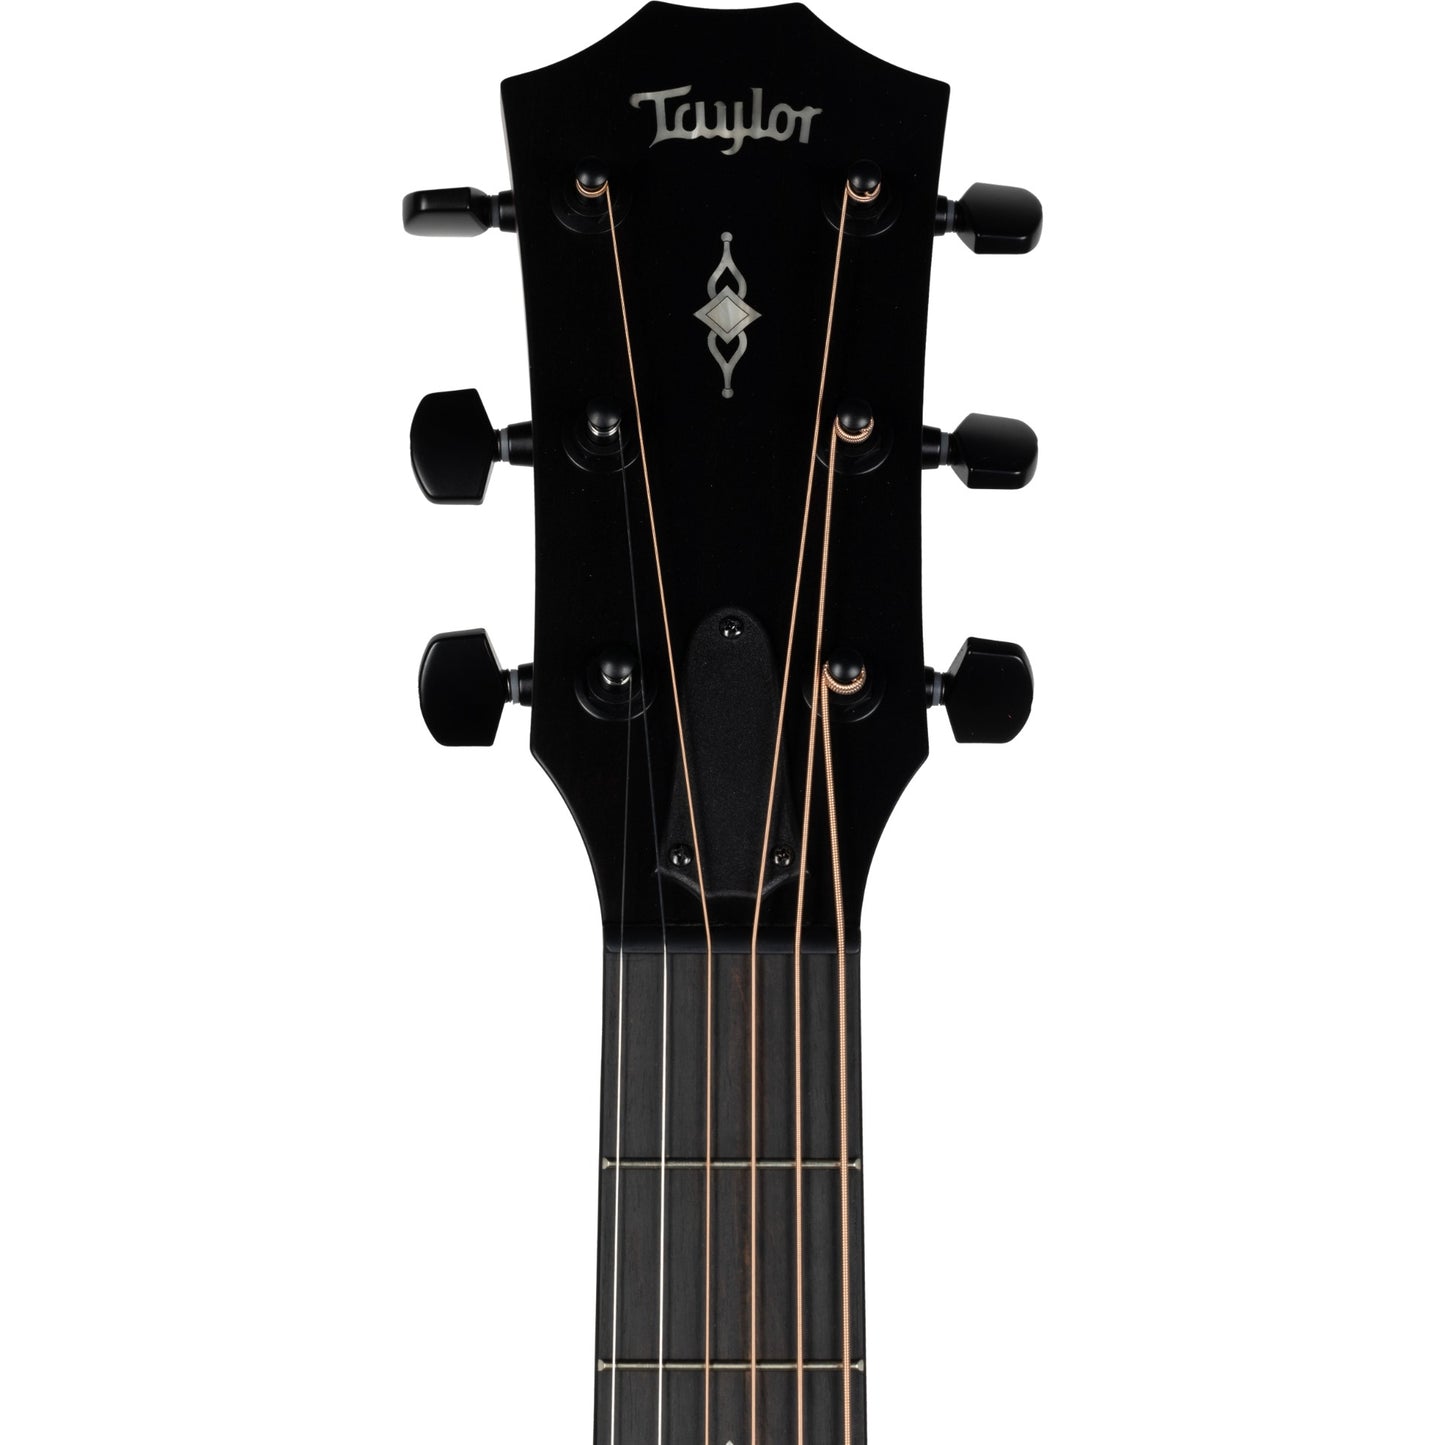 Taylor 324e Left Handed Acoustic Electric Guitar - Shaded Edgeburst